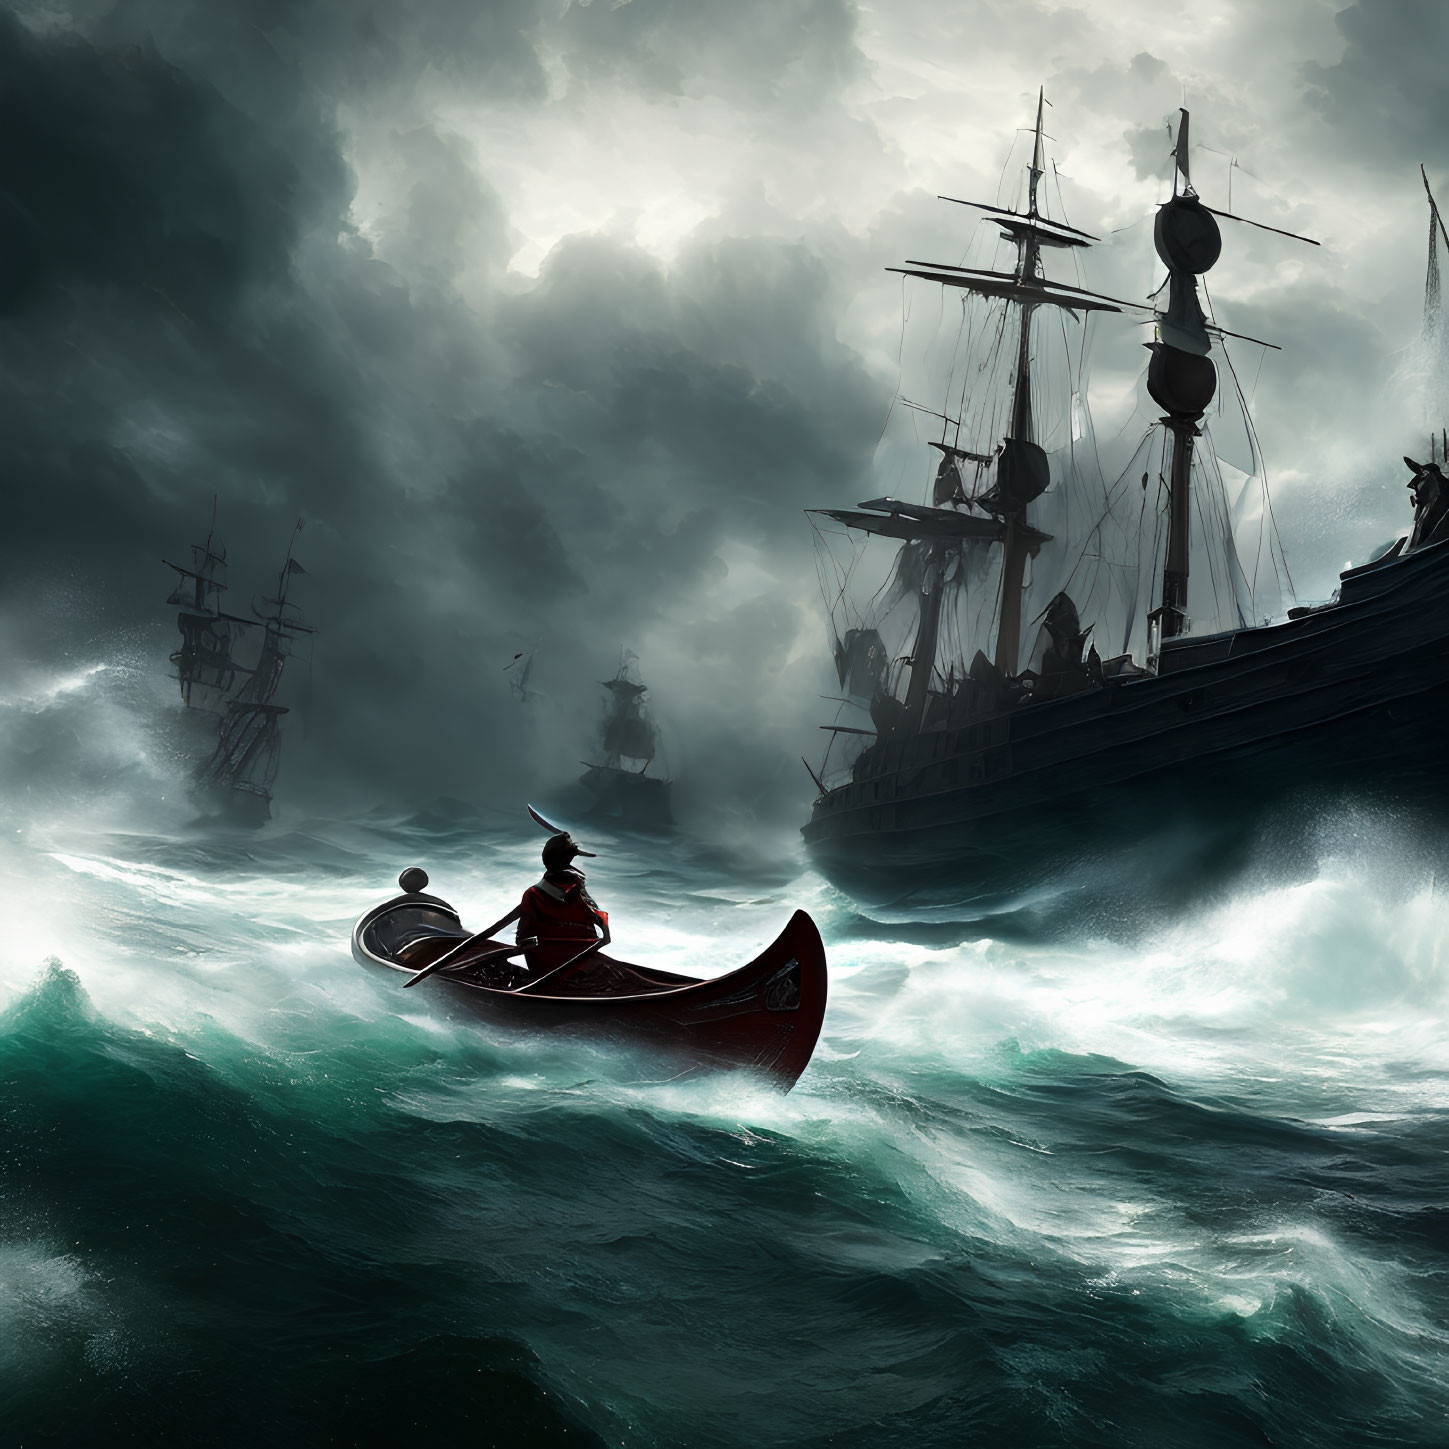 Rowboat with two occupants in stormy seas with tall ships in background